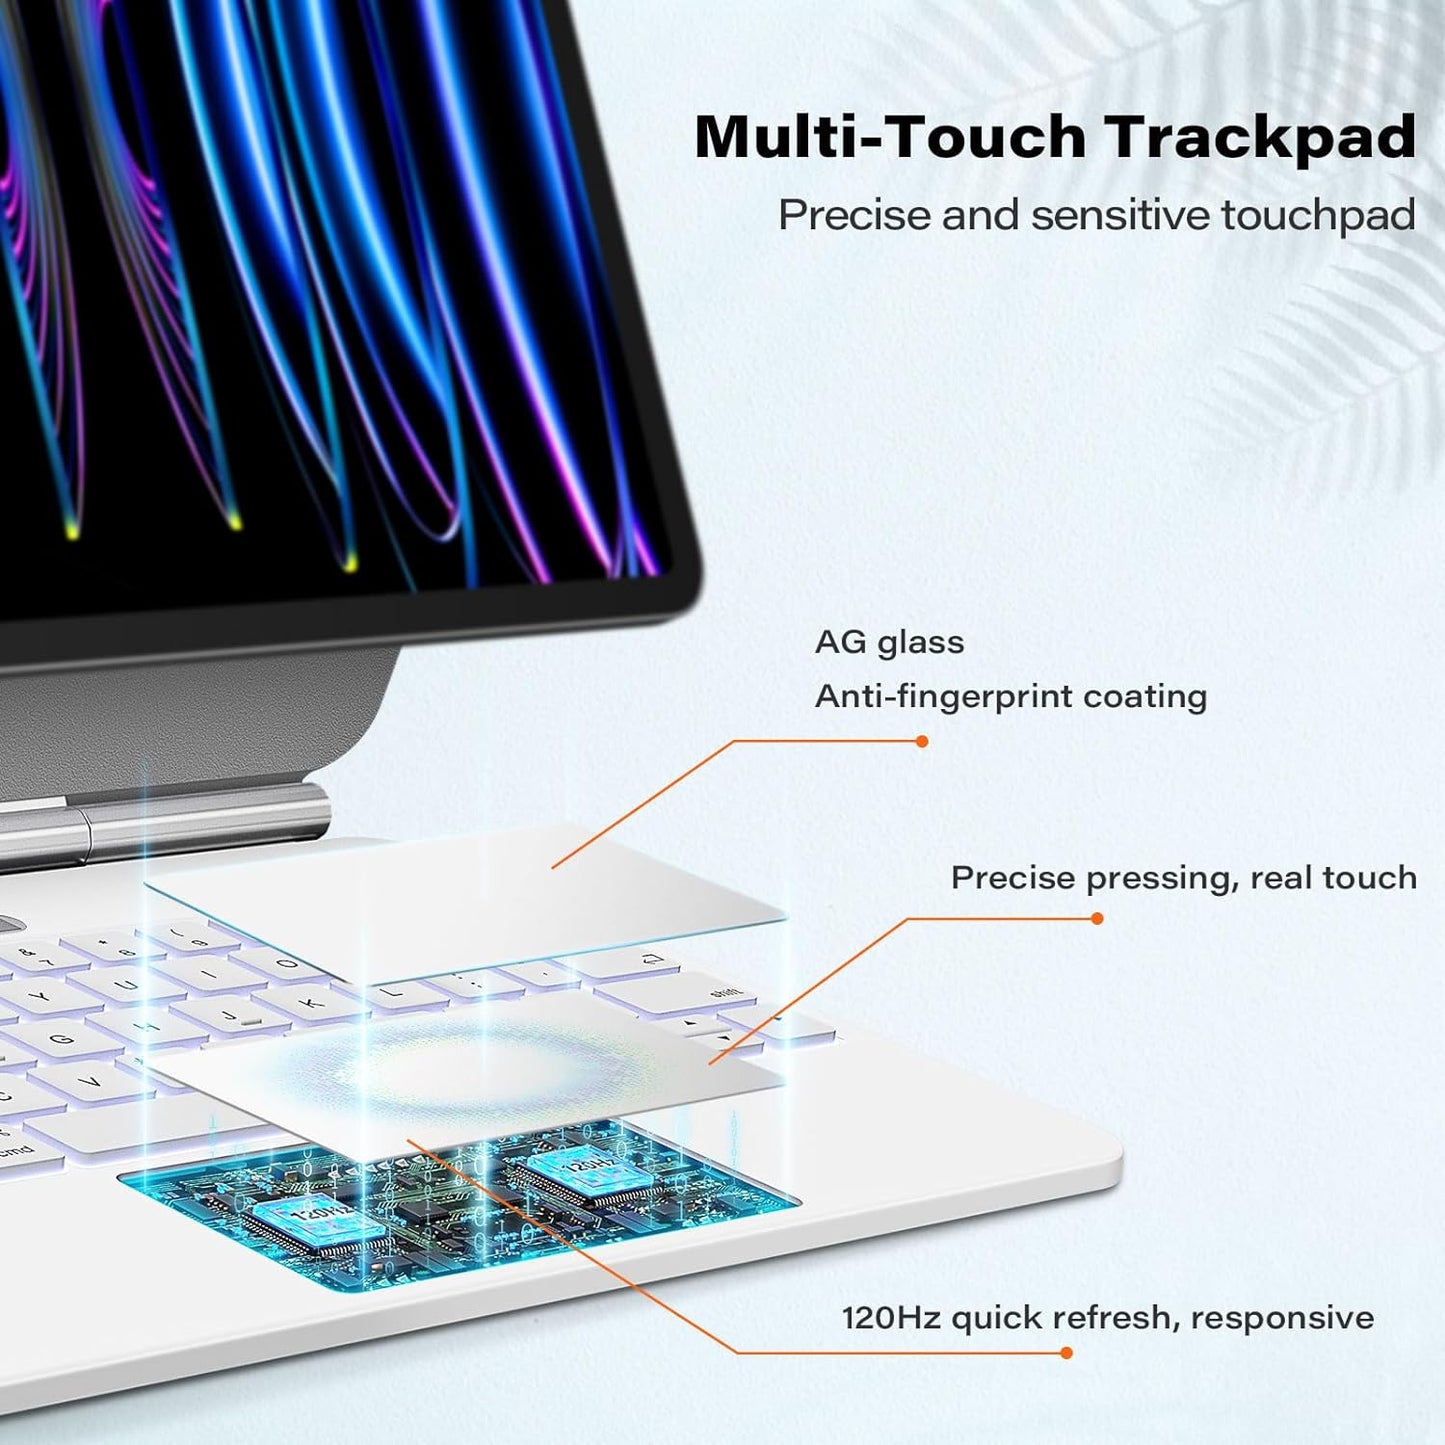 Keyboard for iPad Pro 11 inch (1st, 2nd, 3rd, 4th Gen) and iPad Air (4th, 5th Gen), Floating Cantilever Stand with Trackpad Backlit Keyboard, Bluetooth.